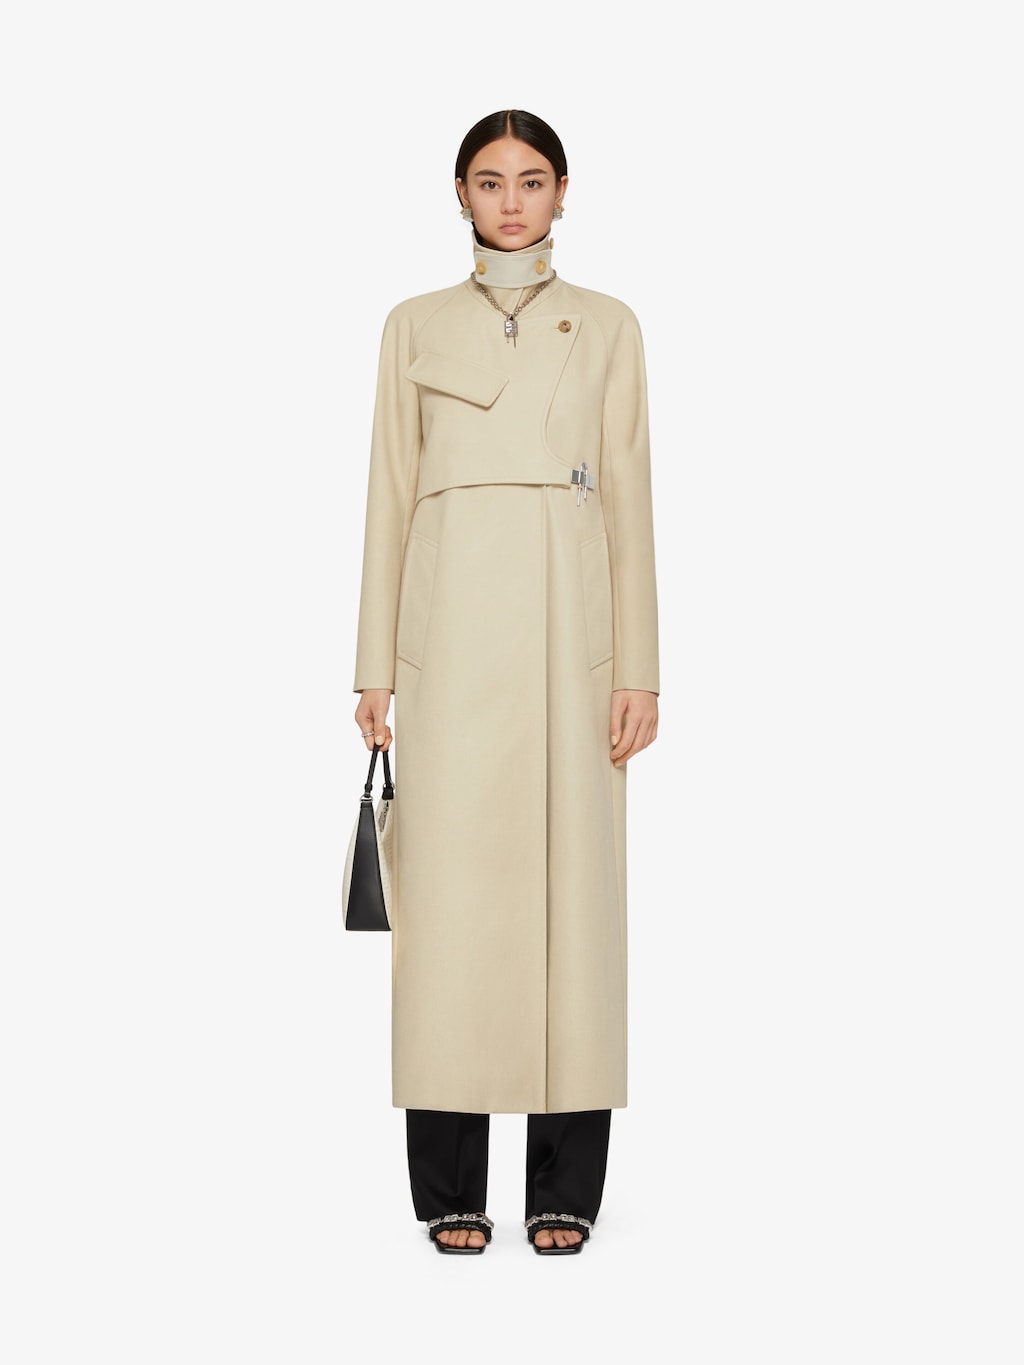 undefined | Trench coat in cotton twill with U-lock buckle